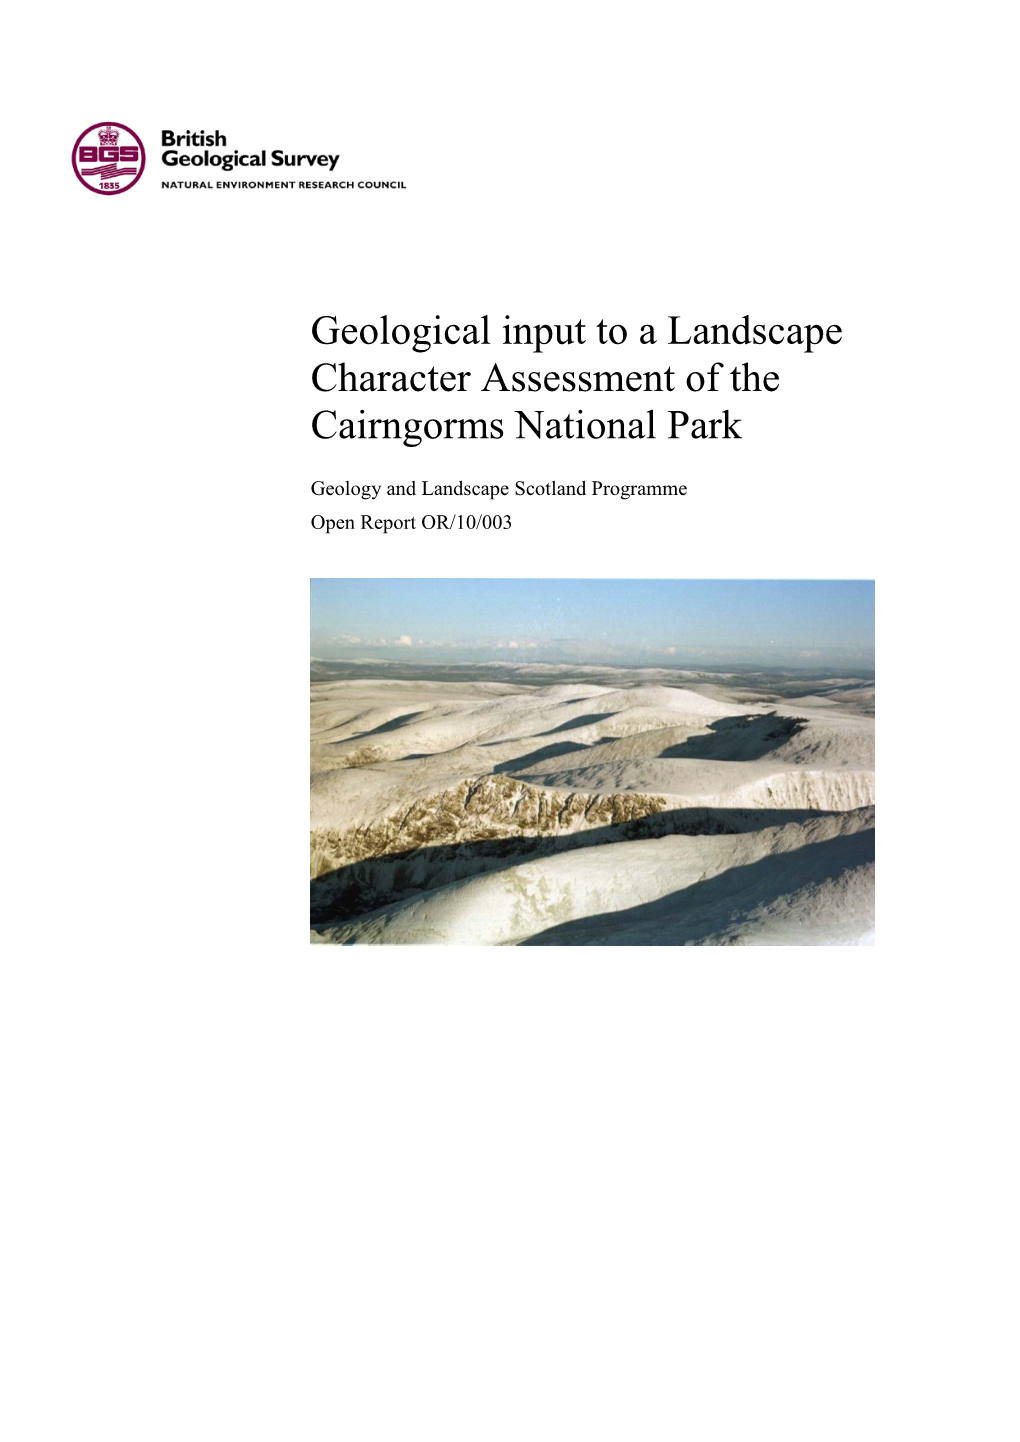 Geological Input to a Landscape Character Assessment of the Cairngorms National Park